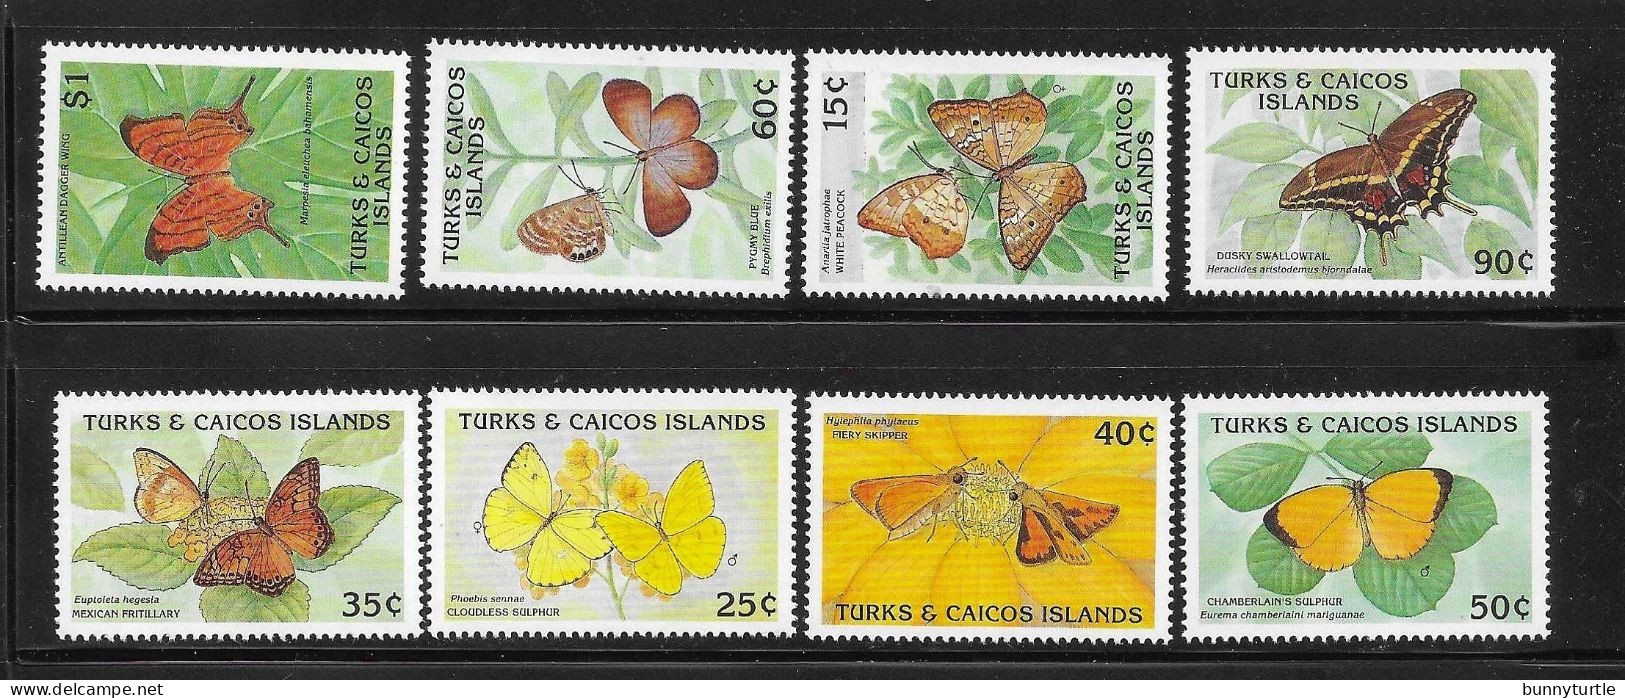 Turks And Caicos Islands 1990 Butterflies Butterfly MNH - Turks & Caicos